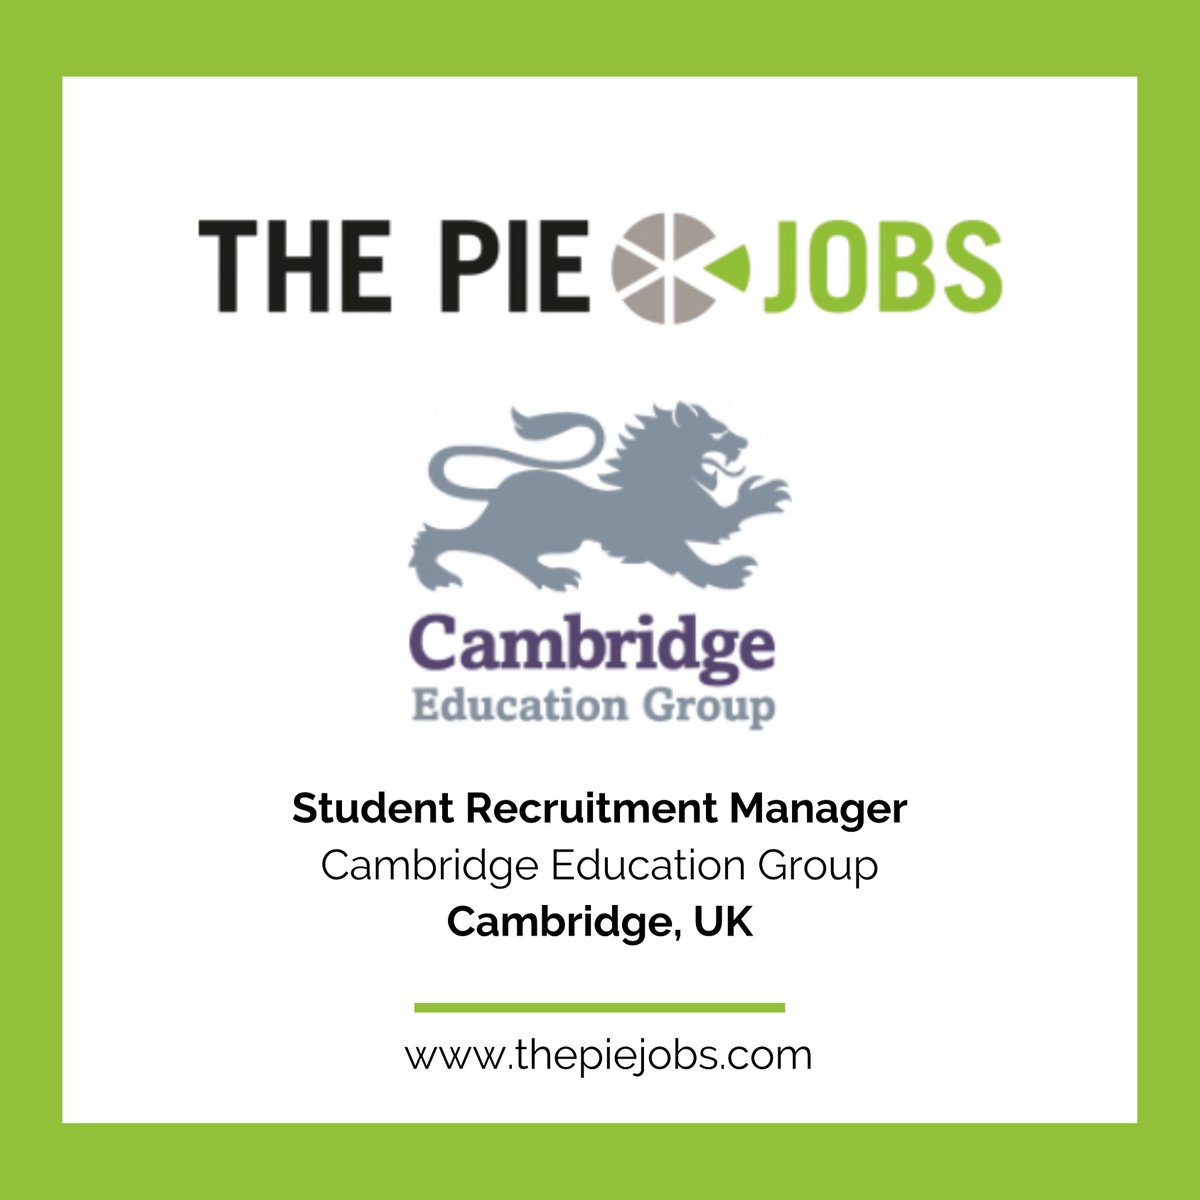 Cambridge Education Group is #hiring a Student Recruitment #Manager to join their team in #Cambridge! 

Apply by 22nd May:
hubs.li/Q02x2WZp0

#newjob #career #HigherEd #studentrecruitment #intled #globaleducation #UK